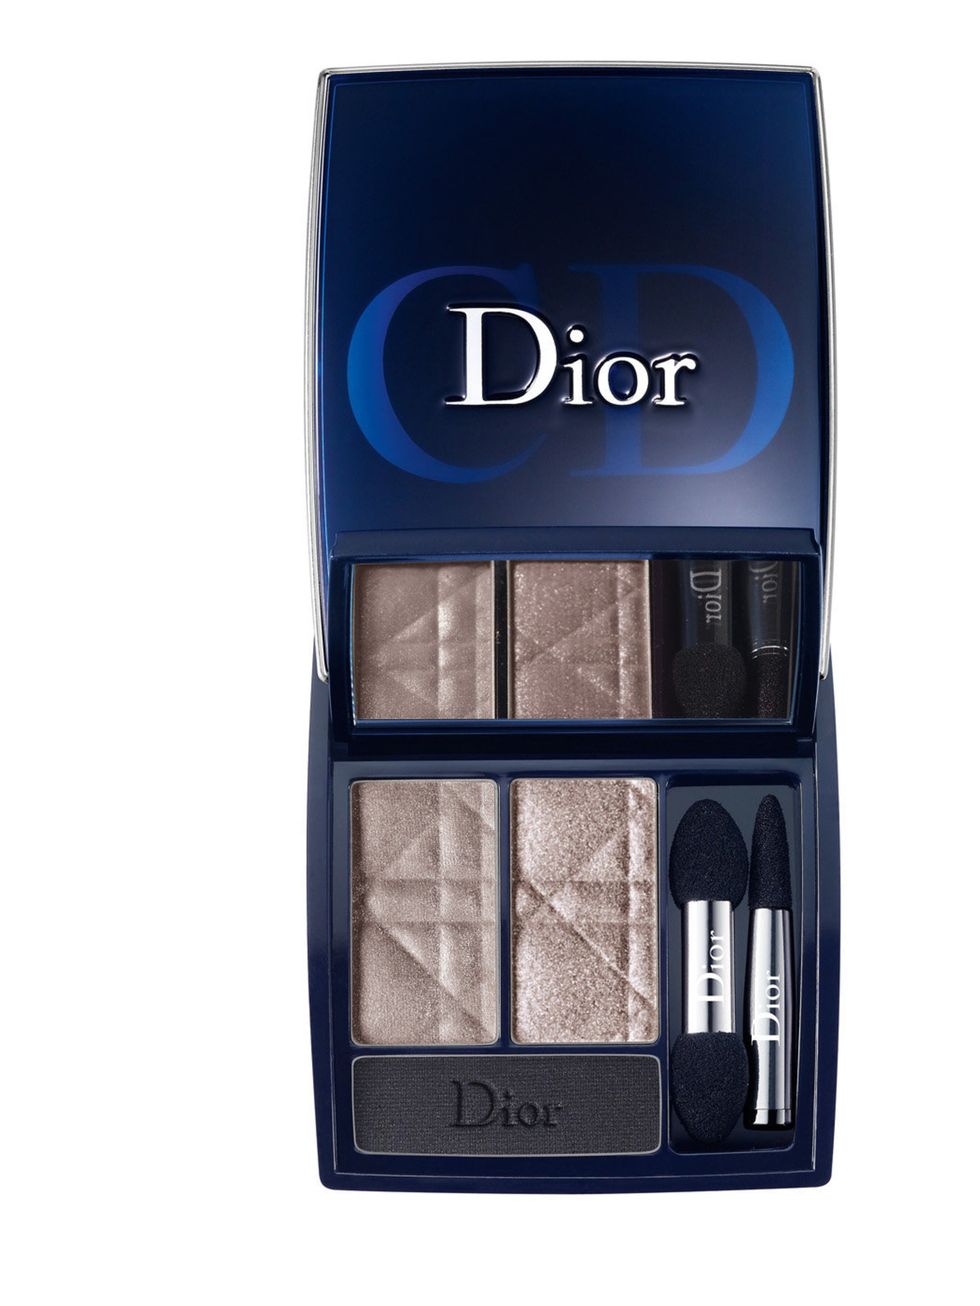 <p><a href="http://www.dior.com/beauty/gbr/en/makeup/eyes/eyeshadows/y0156200/py0156200-ceyeshadows.html"></a></p><p>Achieve the ultimate sultry eye with these mysterious taupes and golds.</p>